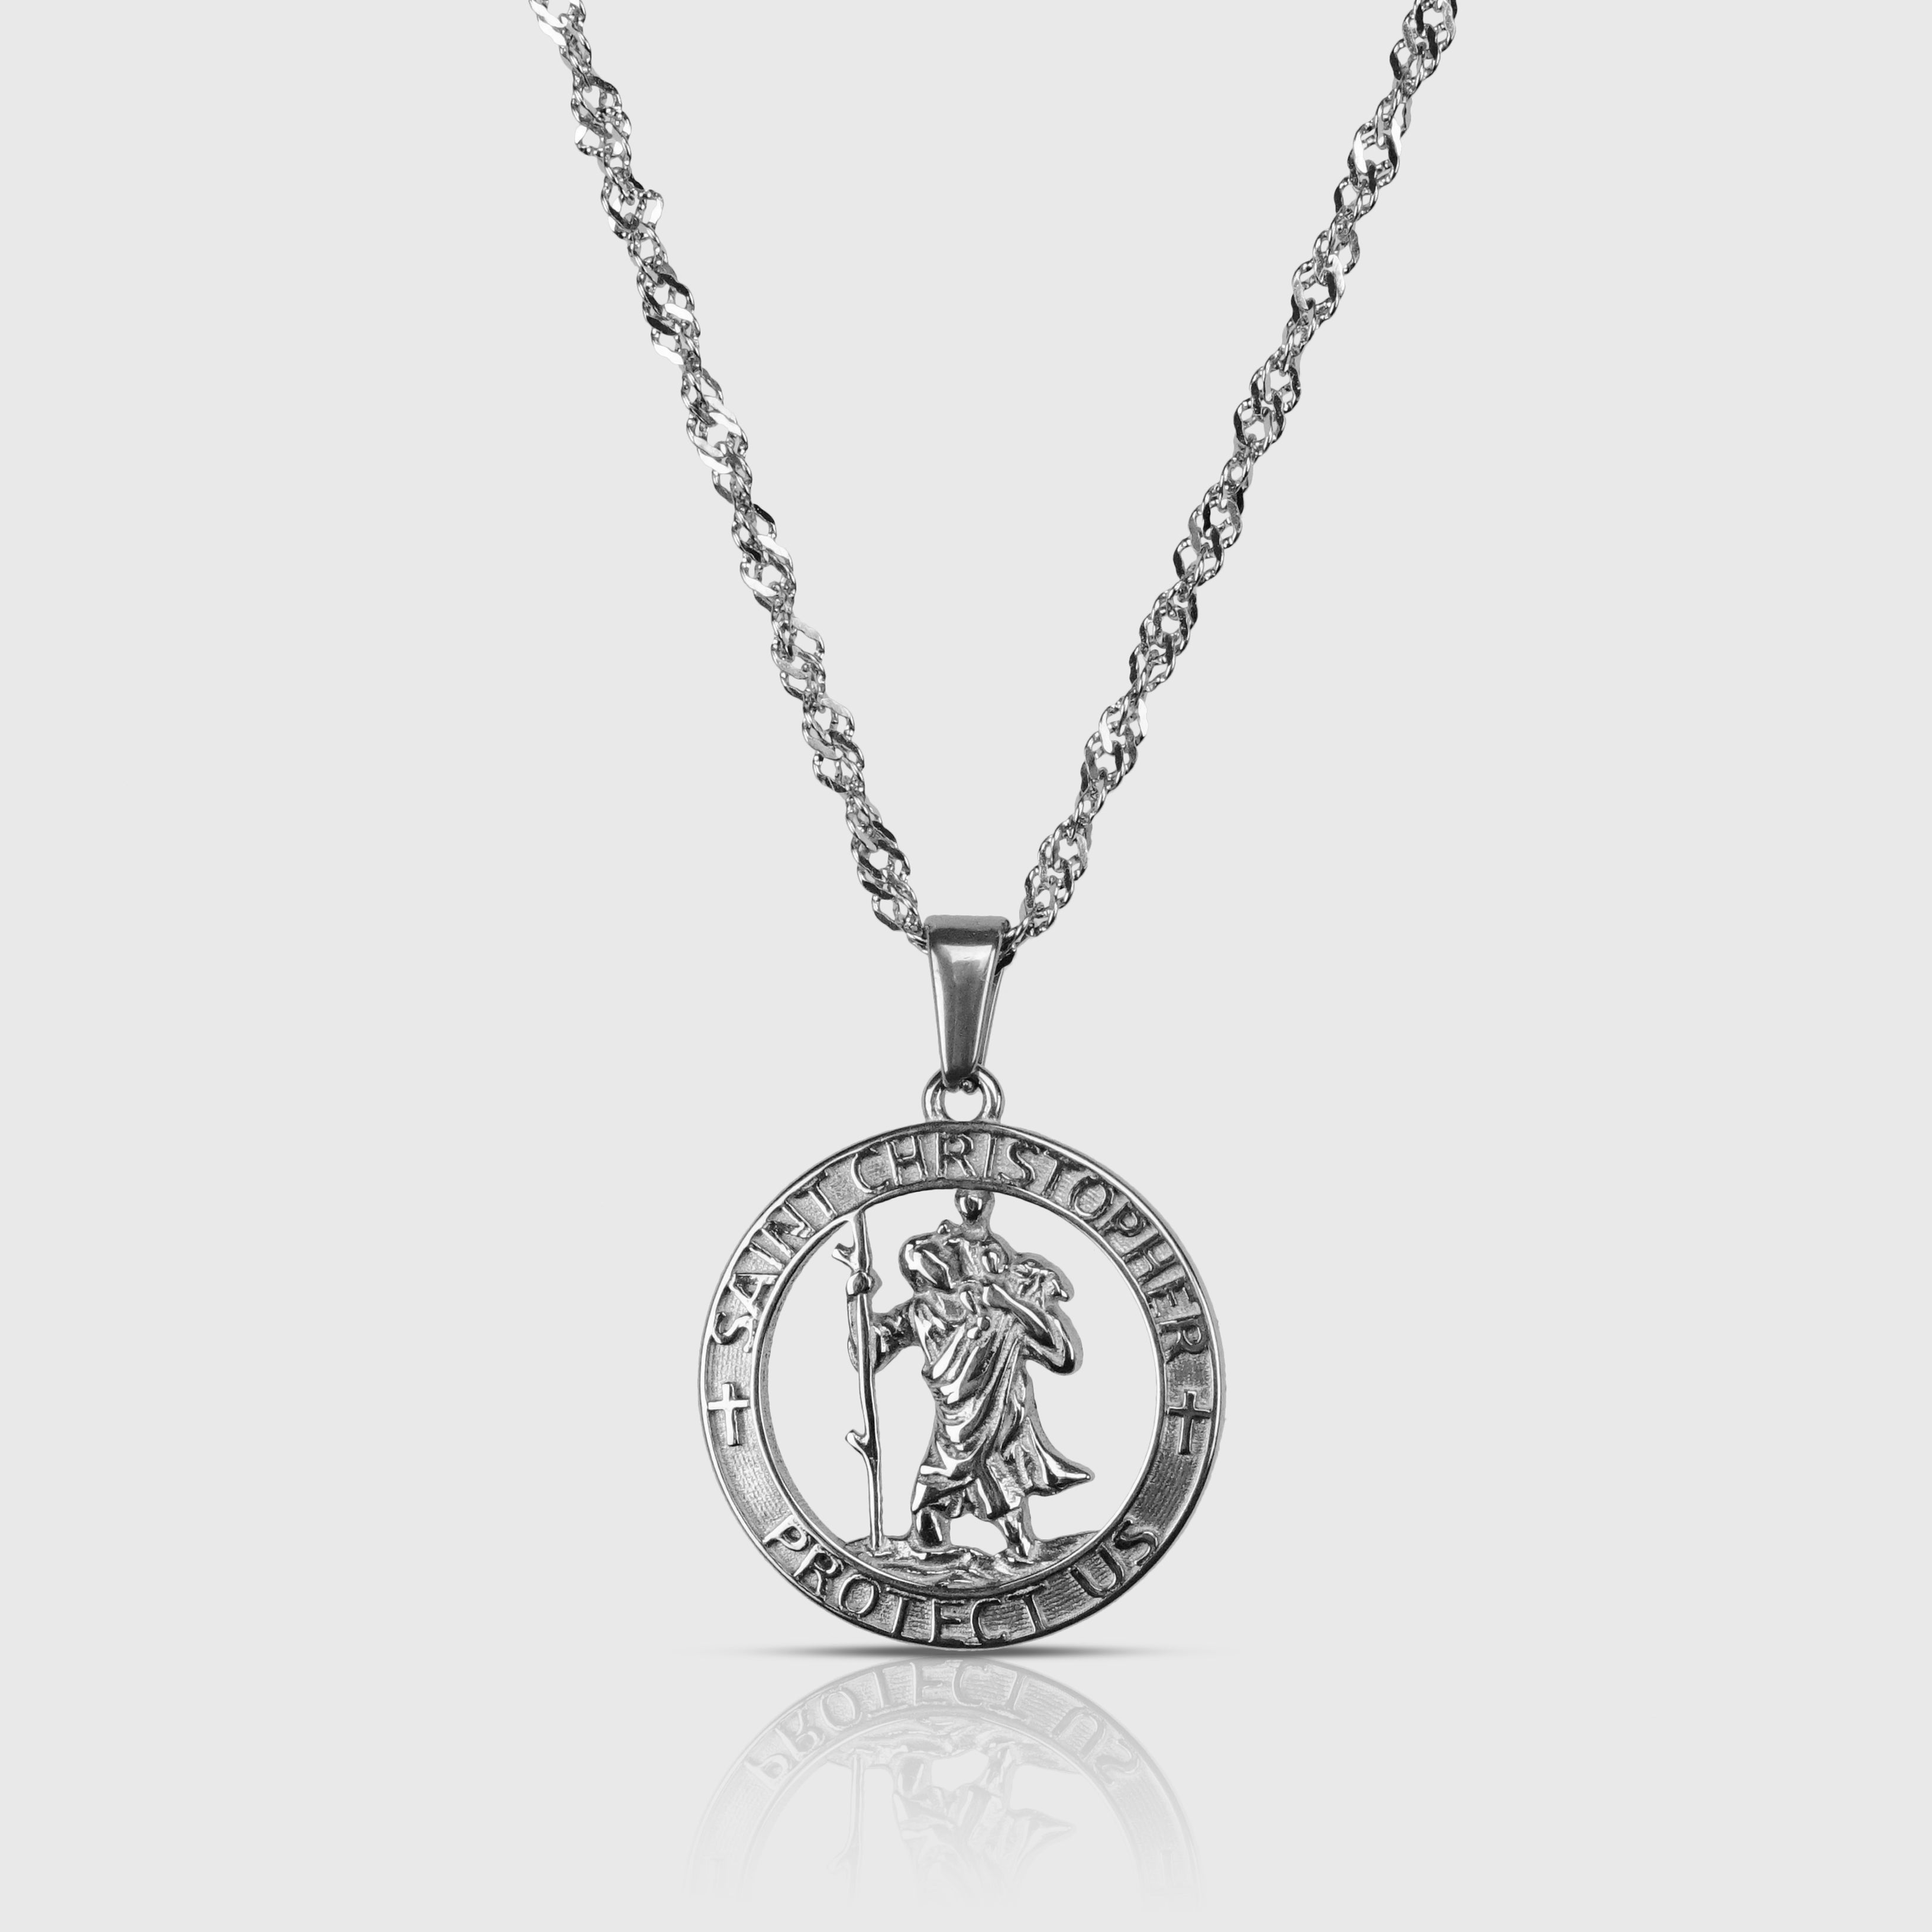 ST. CHRISTOPHER NECKLACE - SILVER TONE